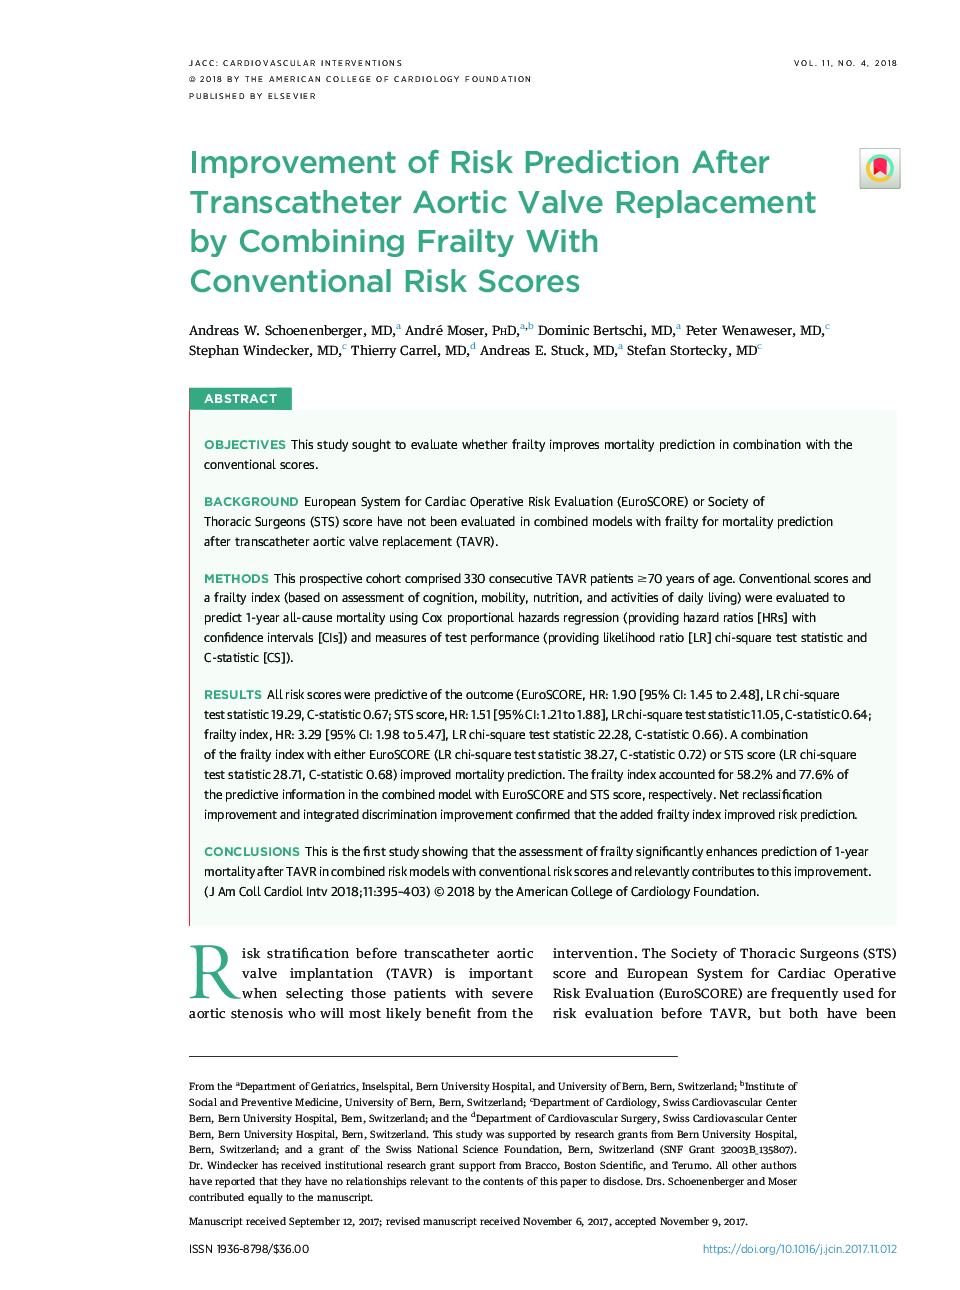 Improvement of Risk Prediction After Transcatheter Aortic Valve Replacement by Combining Frailty With ConventionalÂ Risk Scores